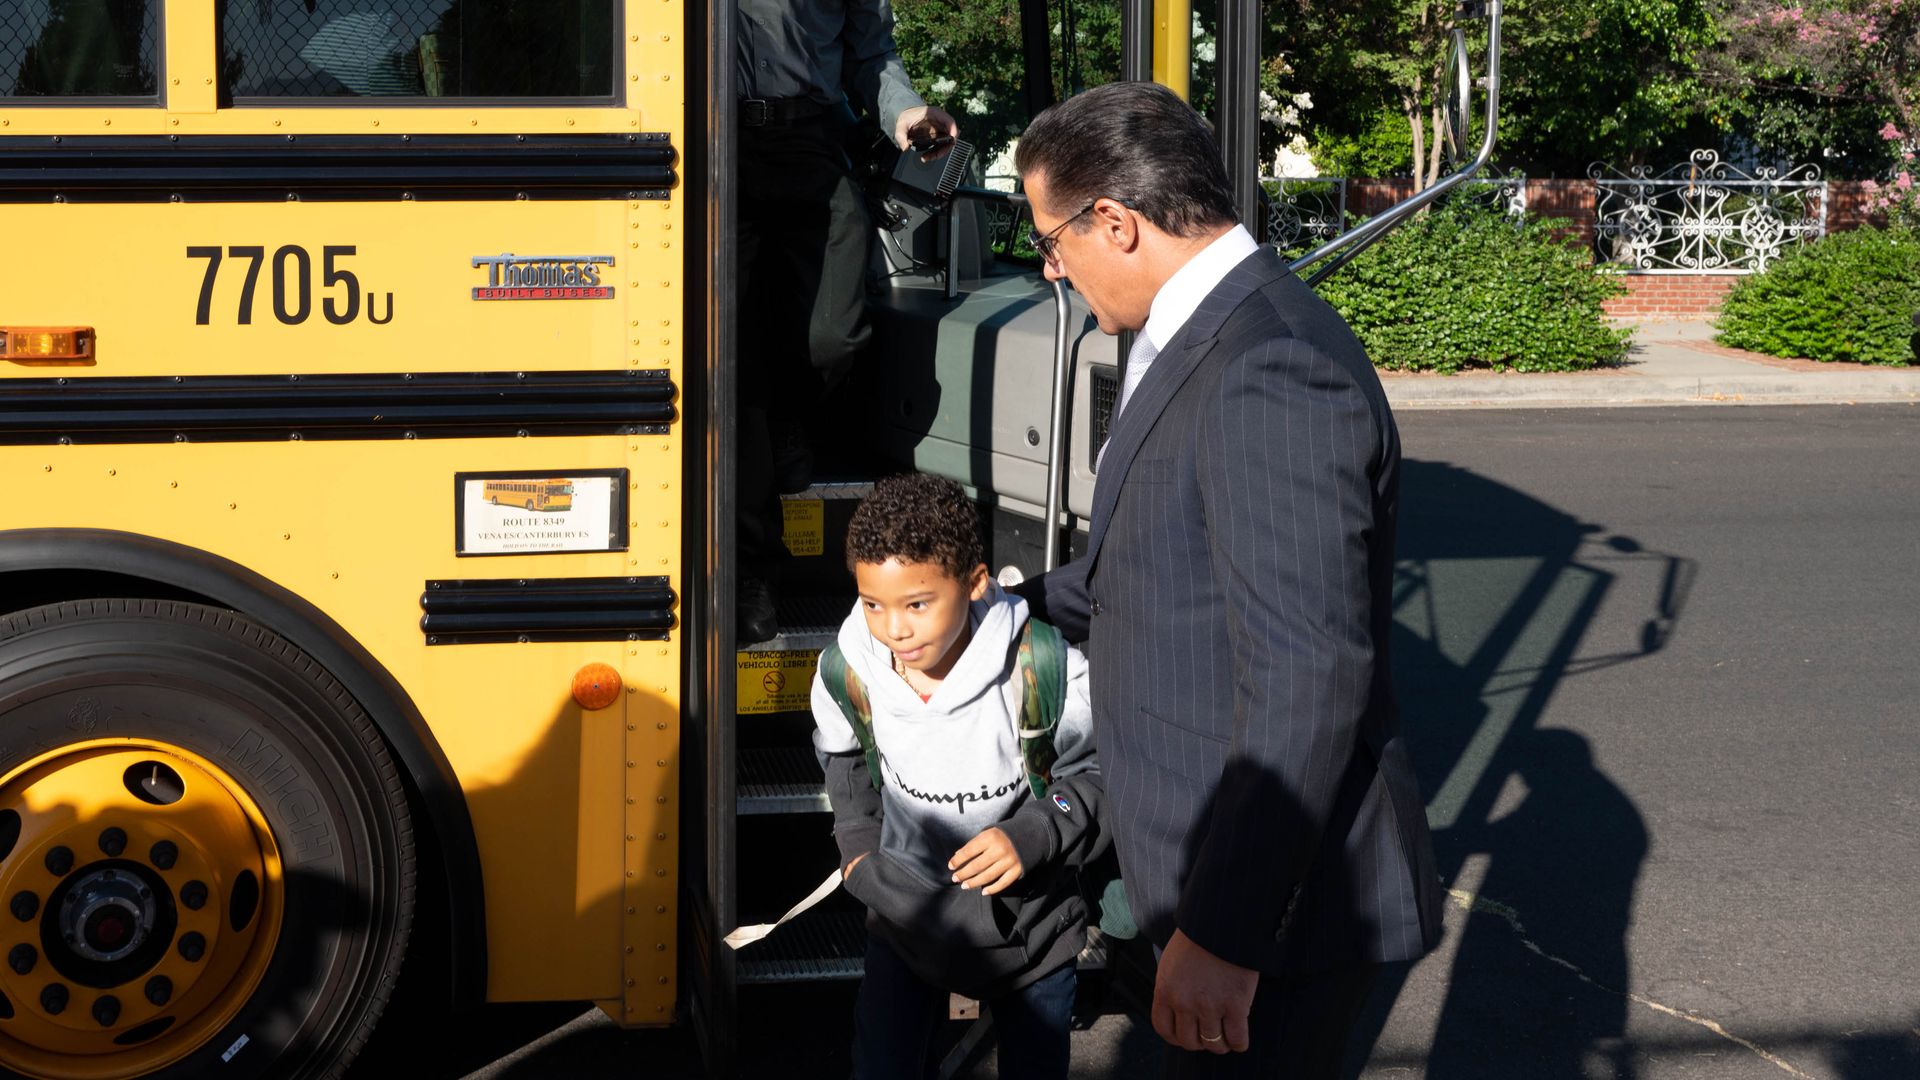 LAUSD superintendent greets students on a school bus